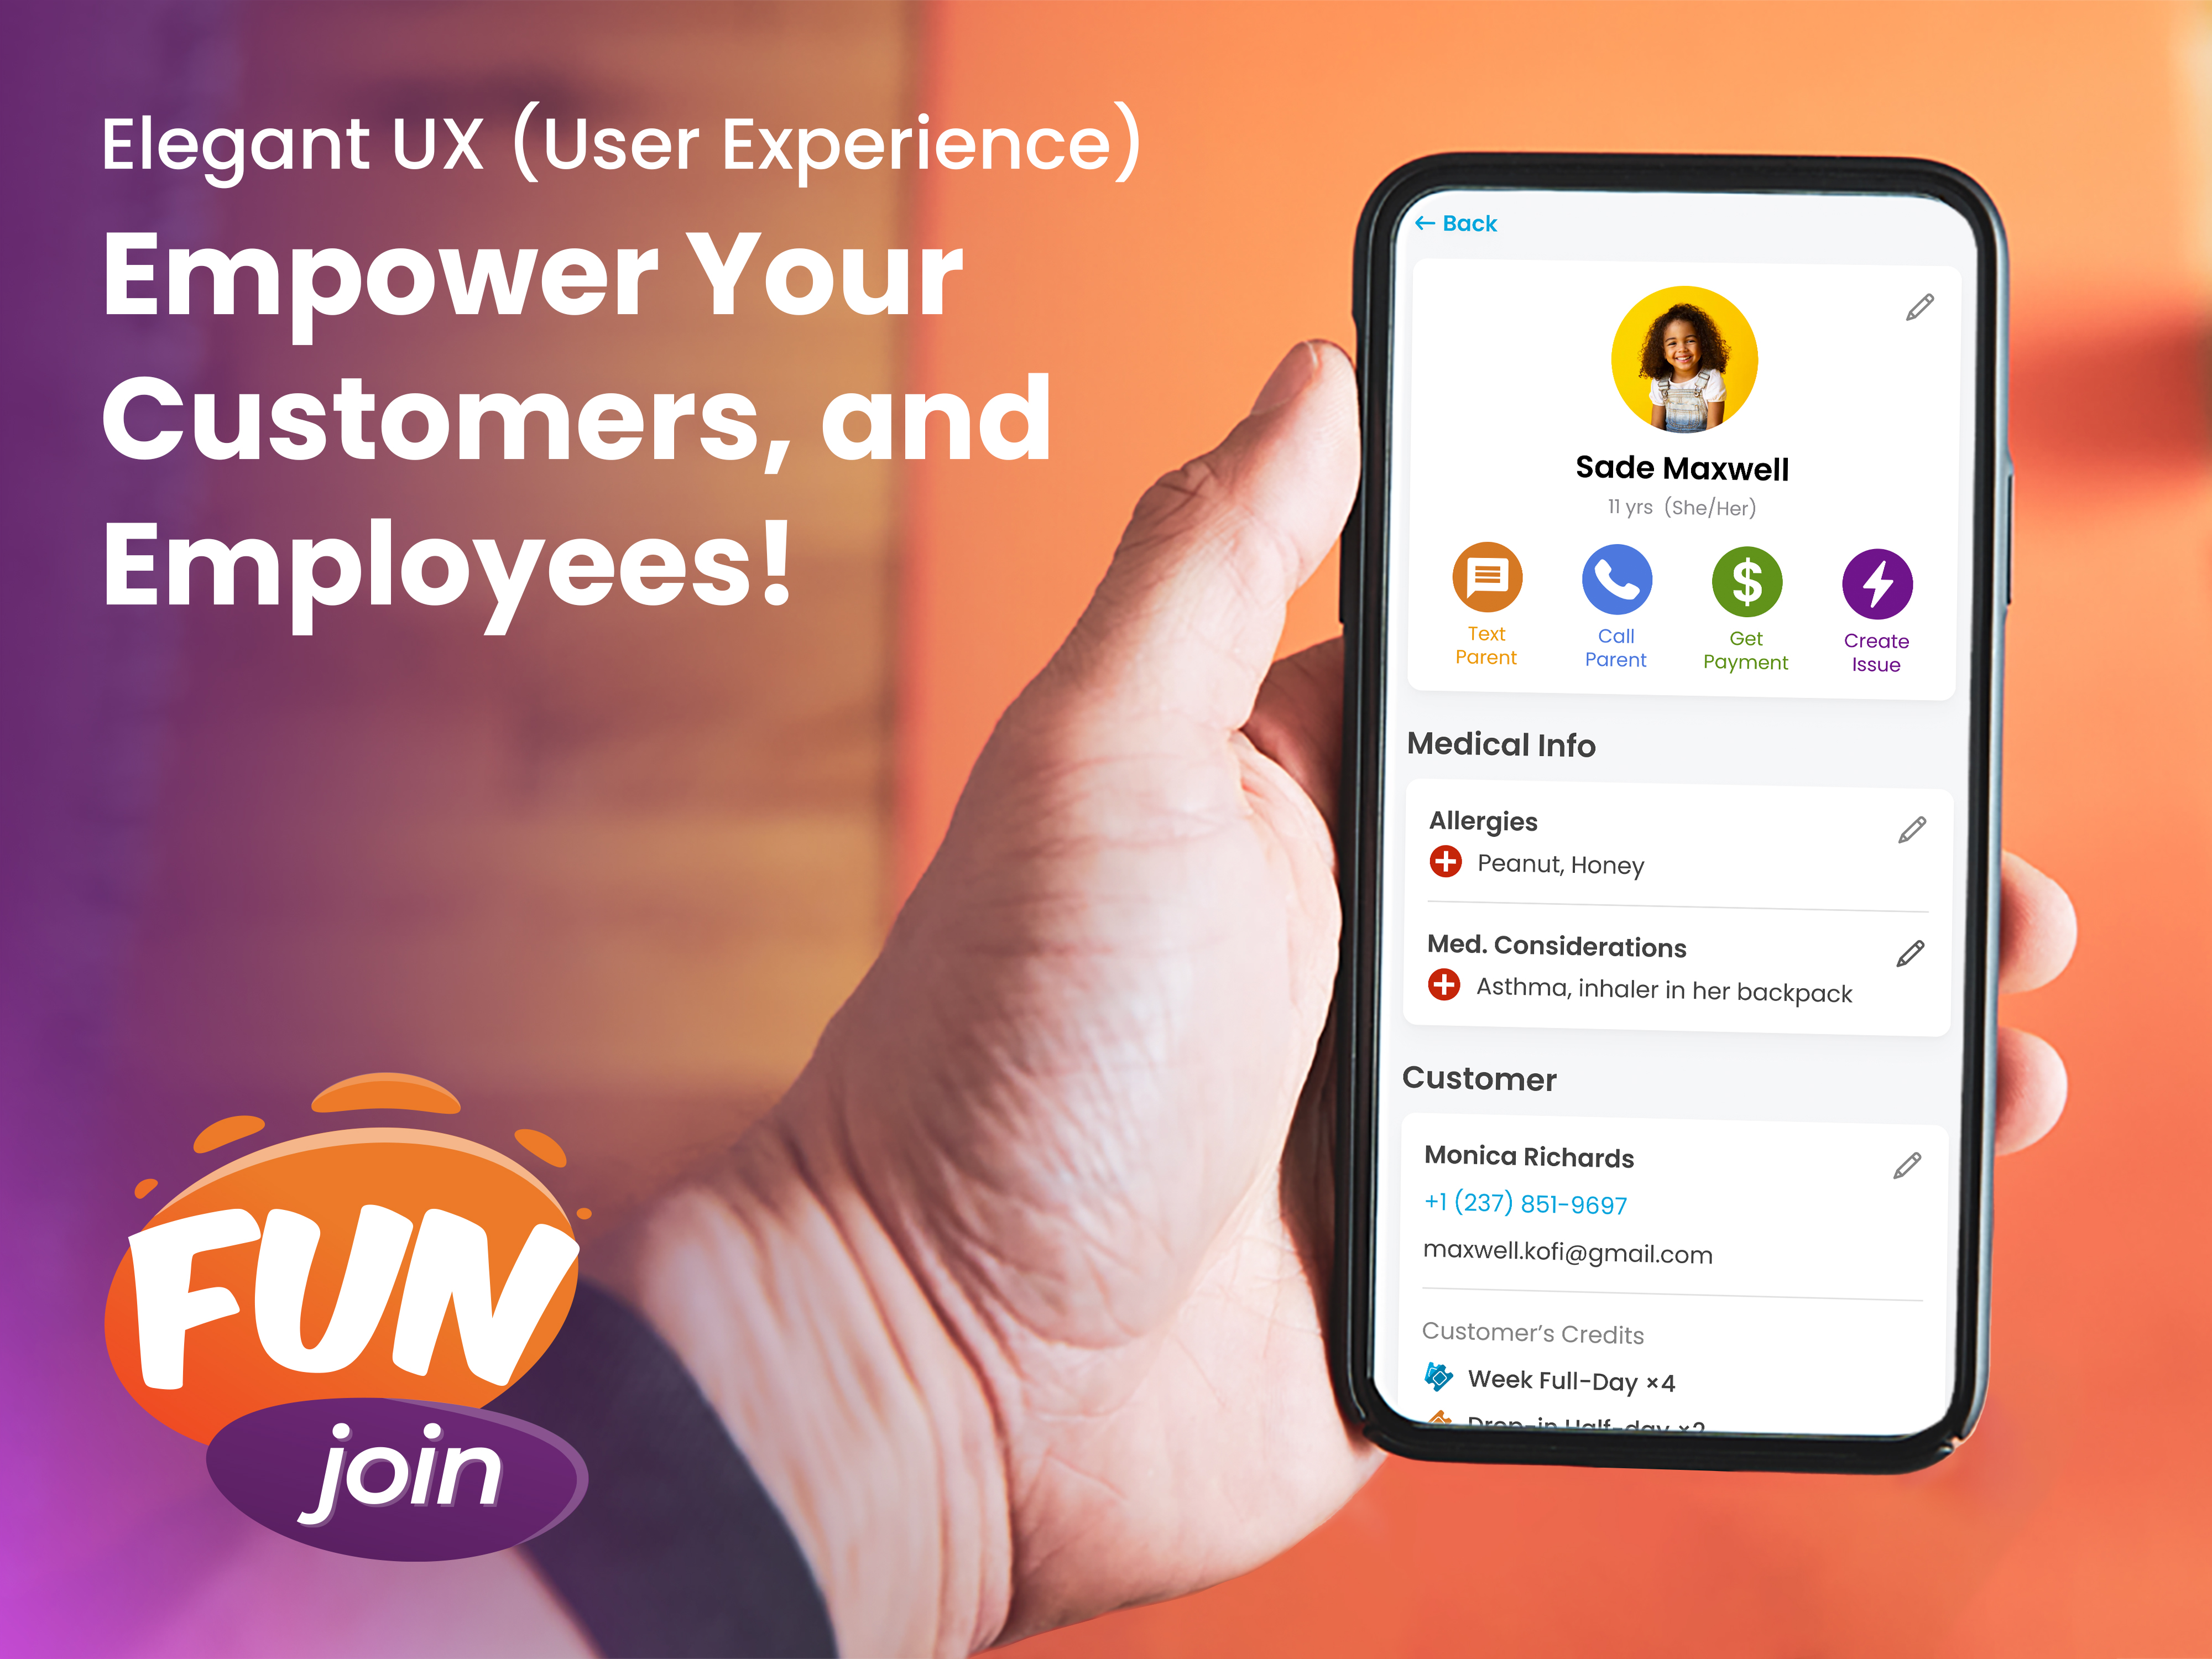 FunJoin's elegant user interface empowers both your customers and employees by providing a streamlined, intuitive platform. It enhances the ease of interaction and simplifies processes, leading to improved efficiency & overall satisfaction for all users.